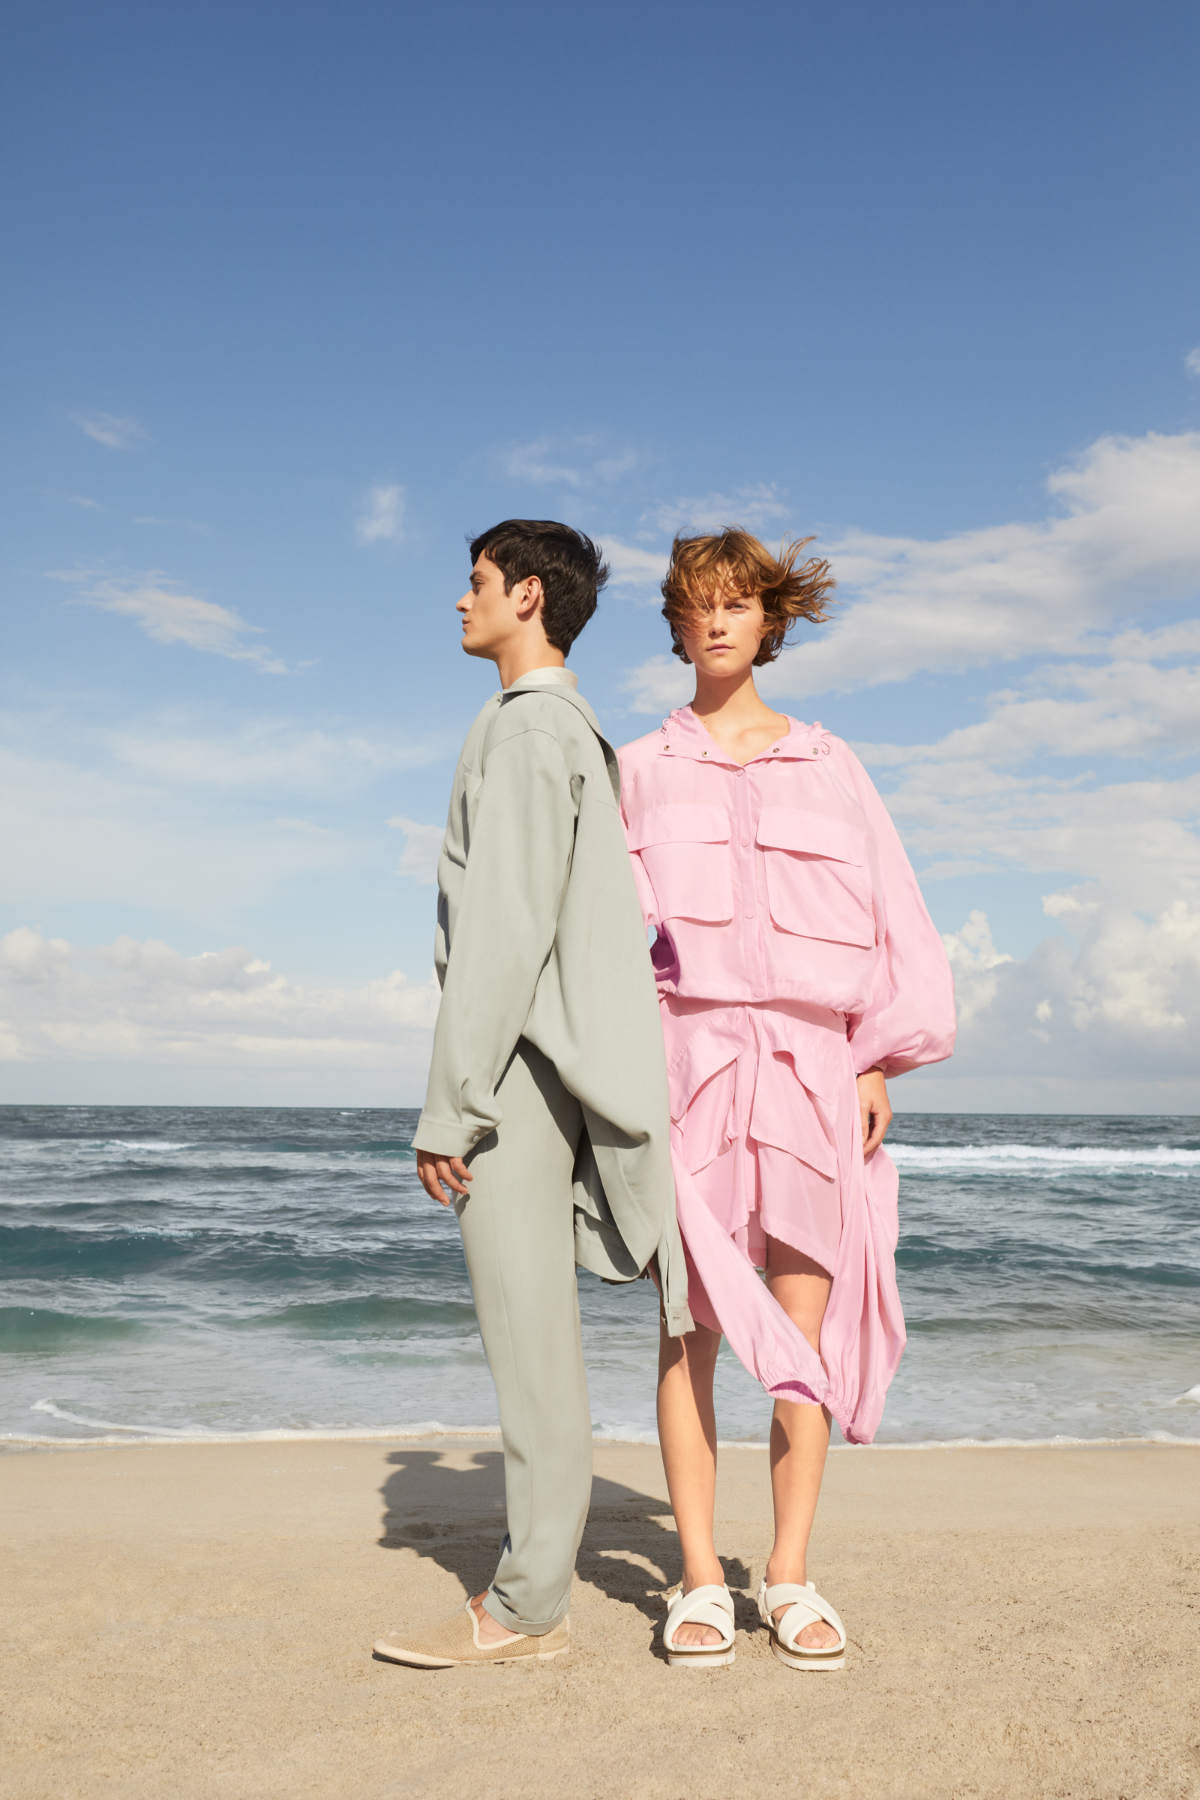 ICICLE Presents Its Spring Summer 2022 Collection